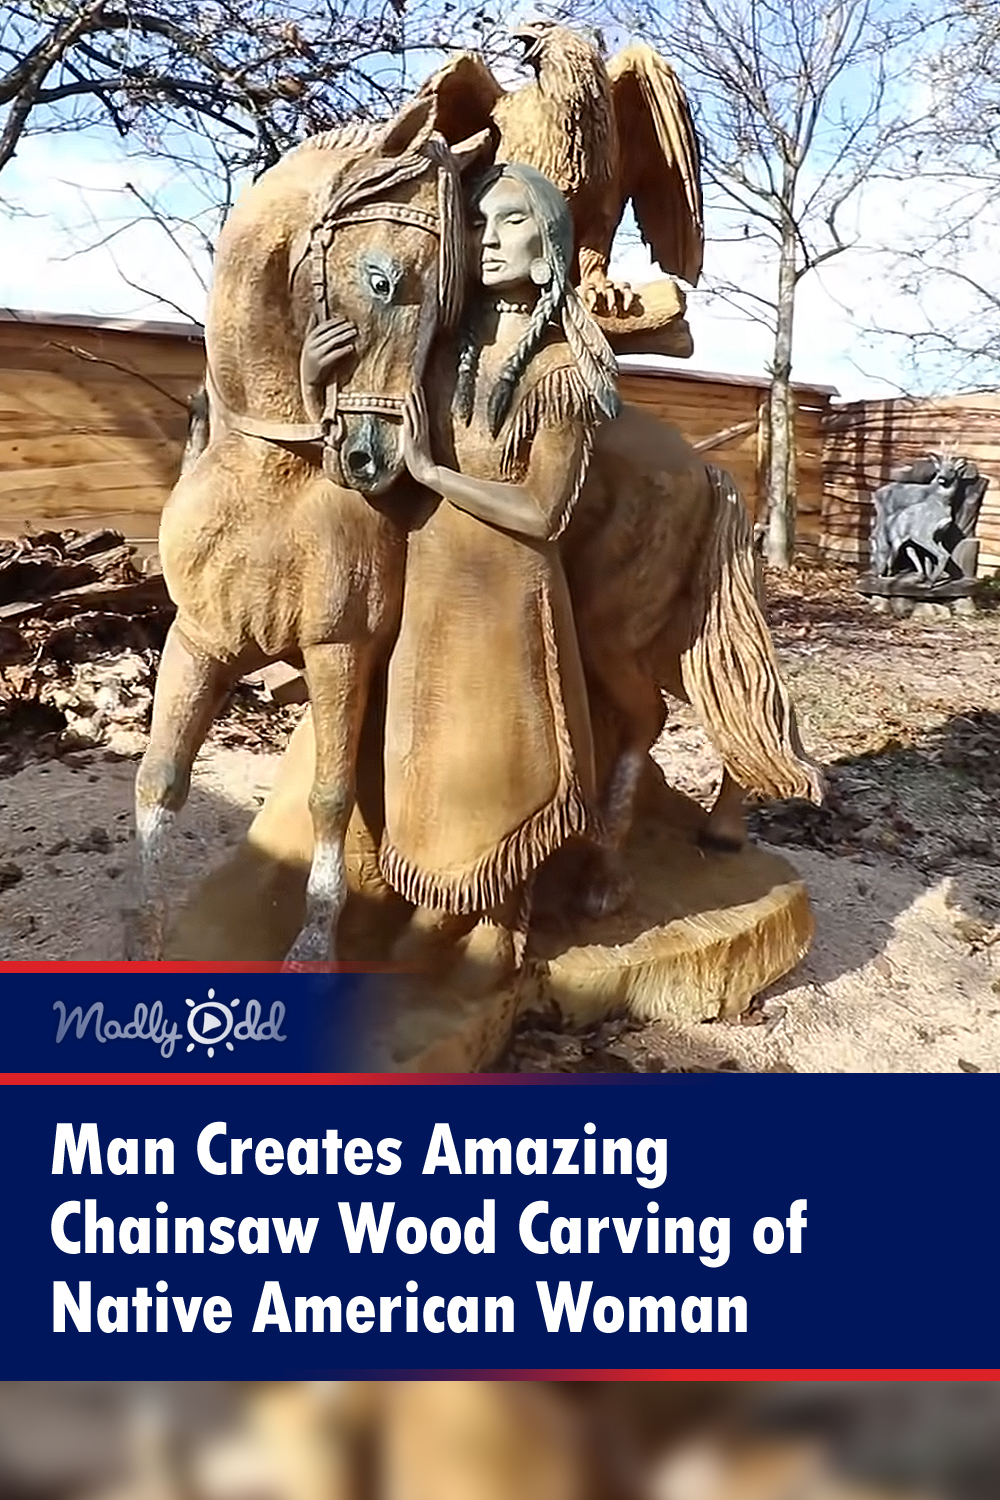 Man Creates Amazing Chainsaw Wood Carving of Native American Woman